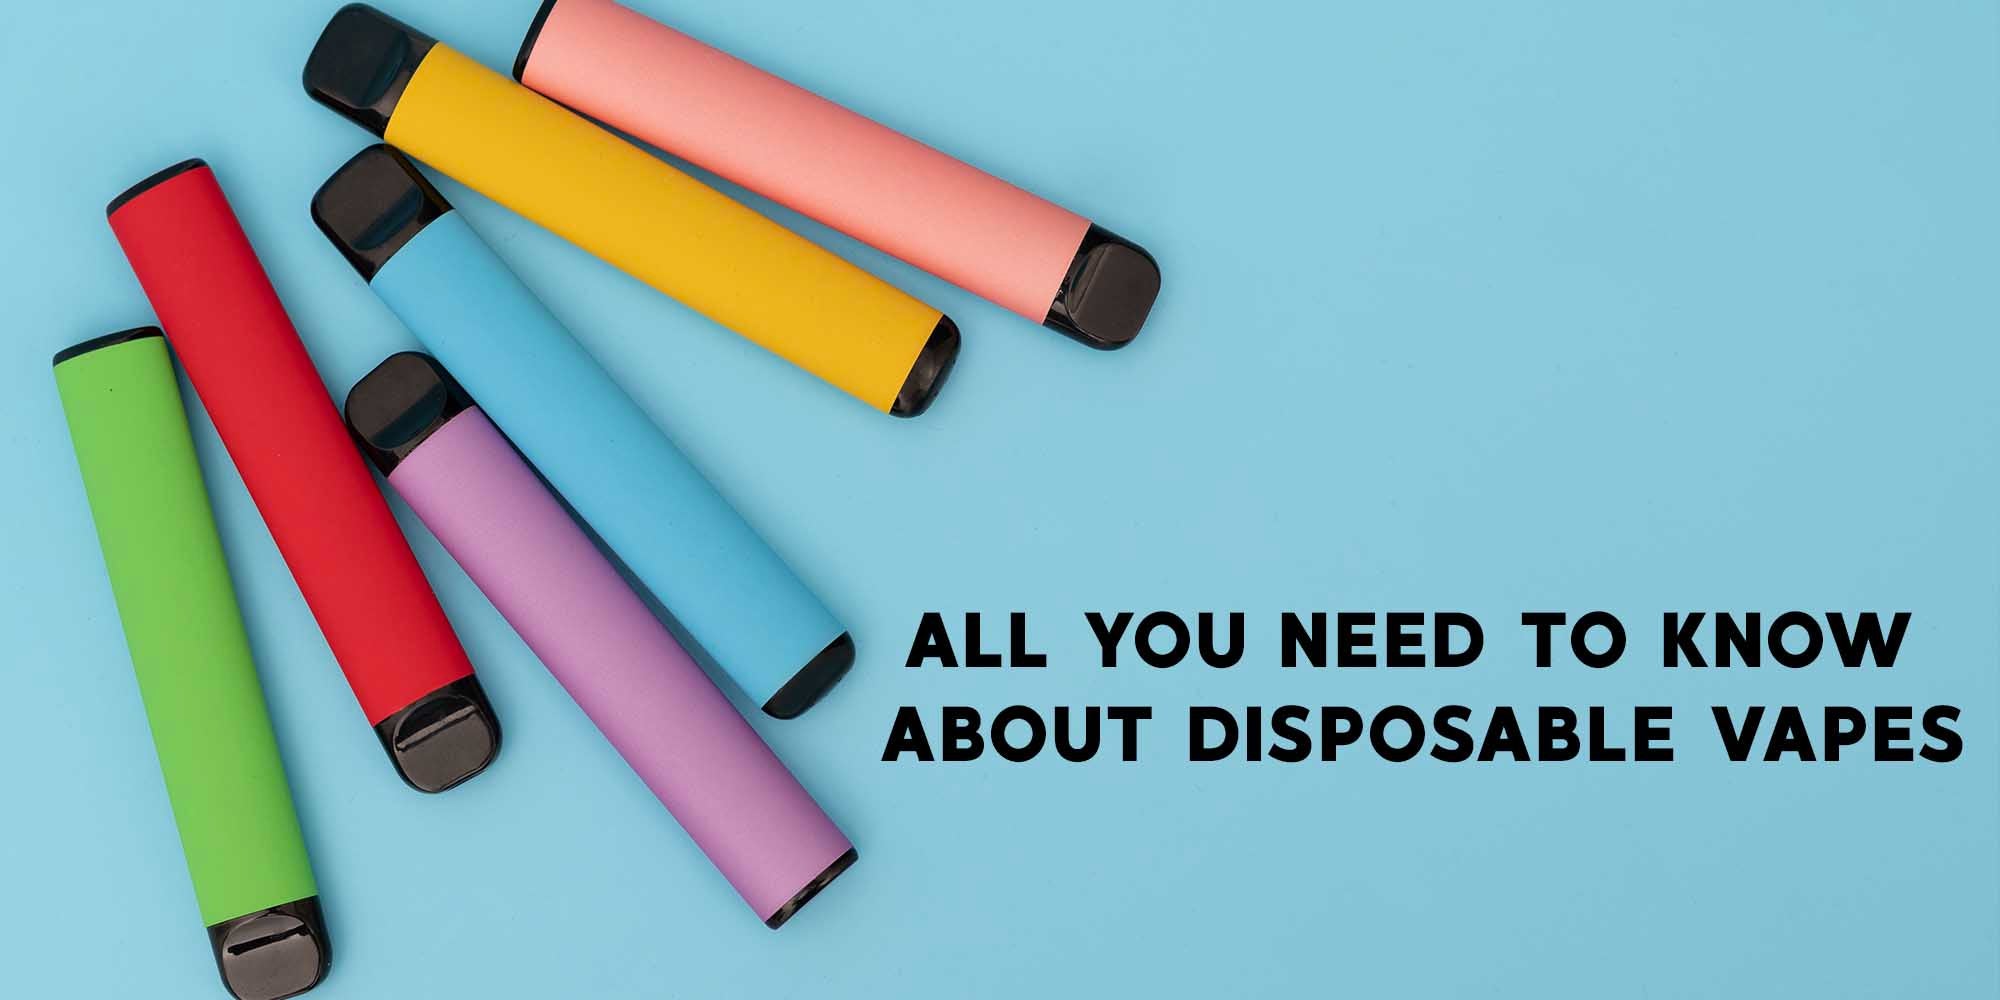 Brief about disposable vapes